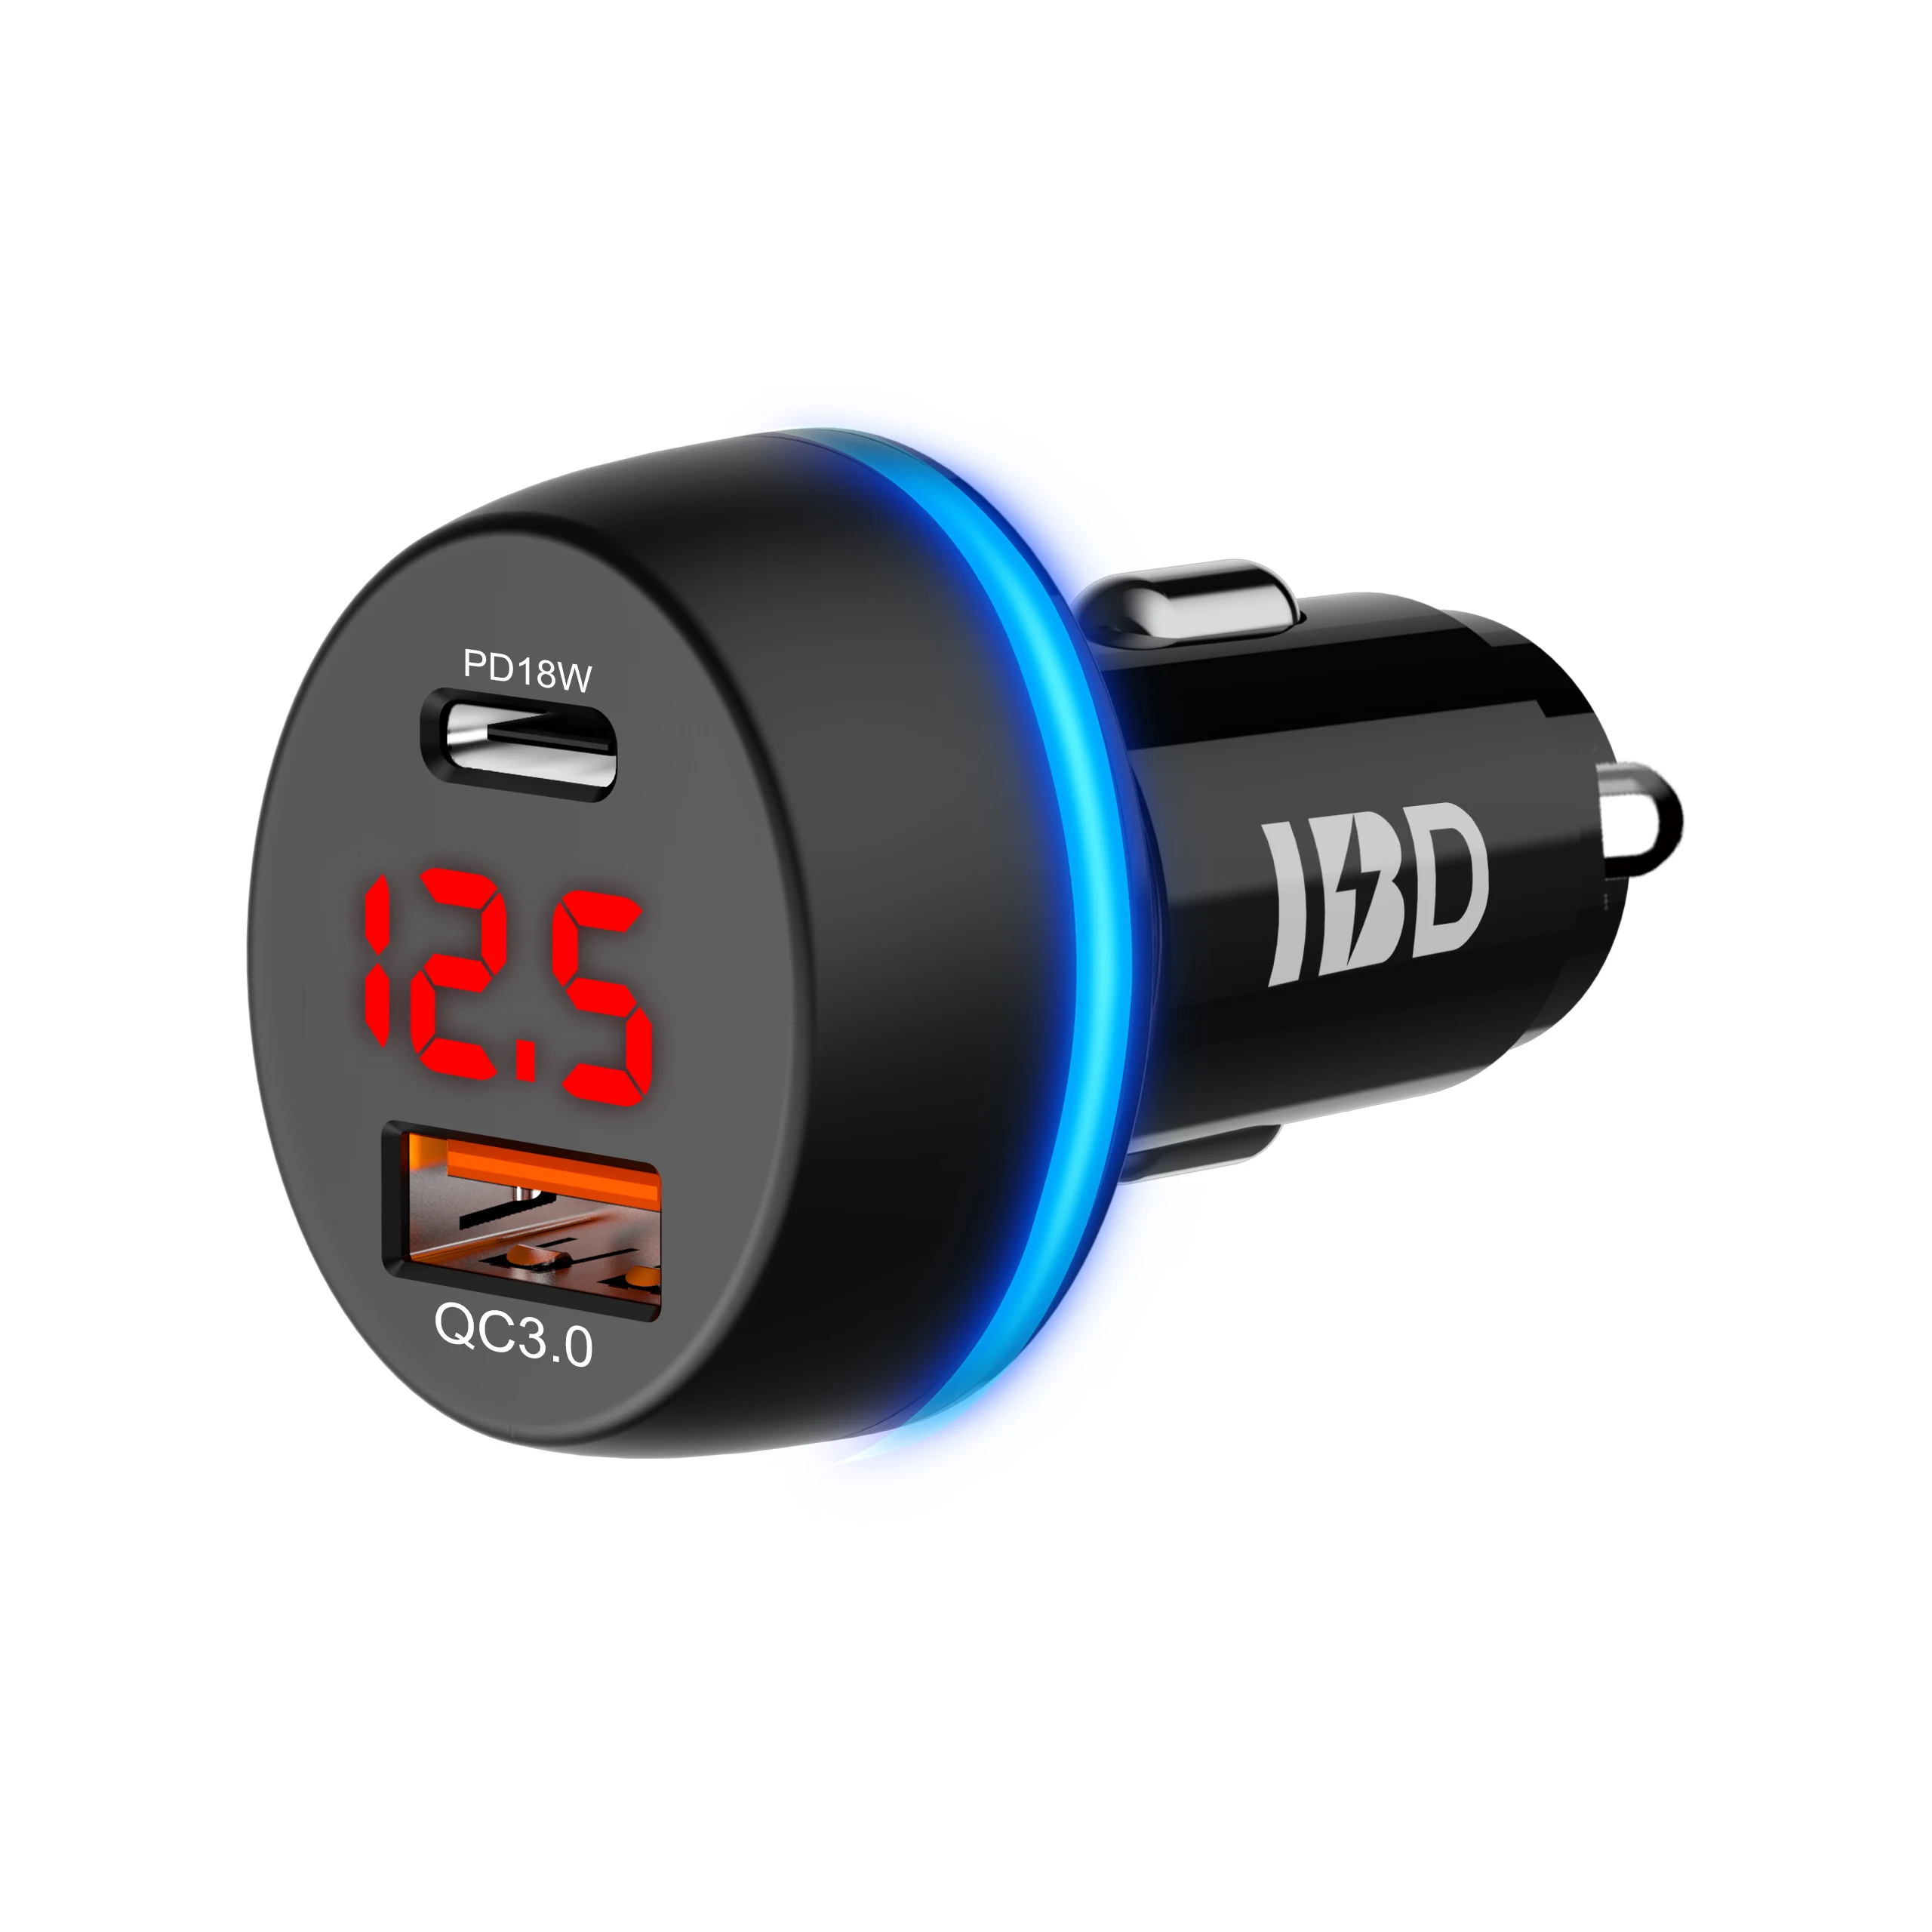 

IBD Mini Car Charger Usb Fast Charging Dual Ports PD 18W Quick Charge Car Charger 36W Max Power With Blue LED